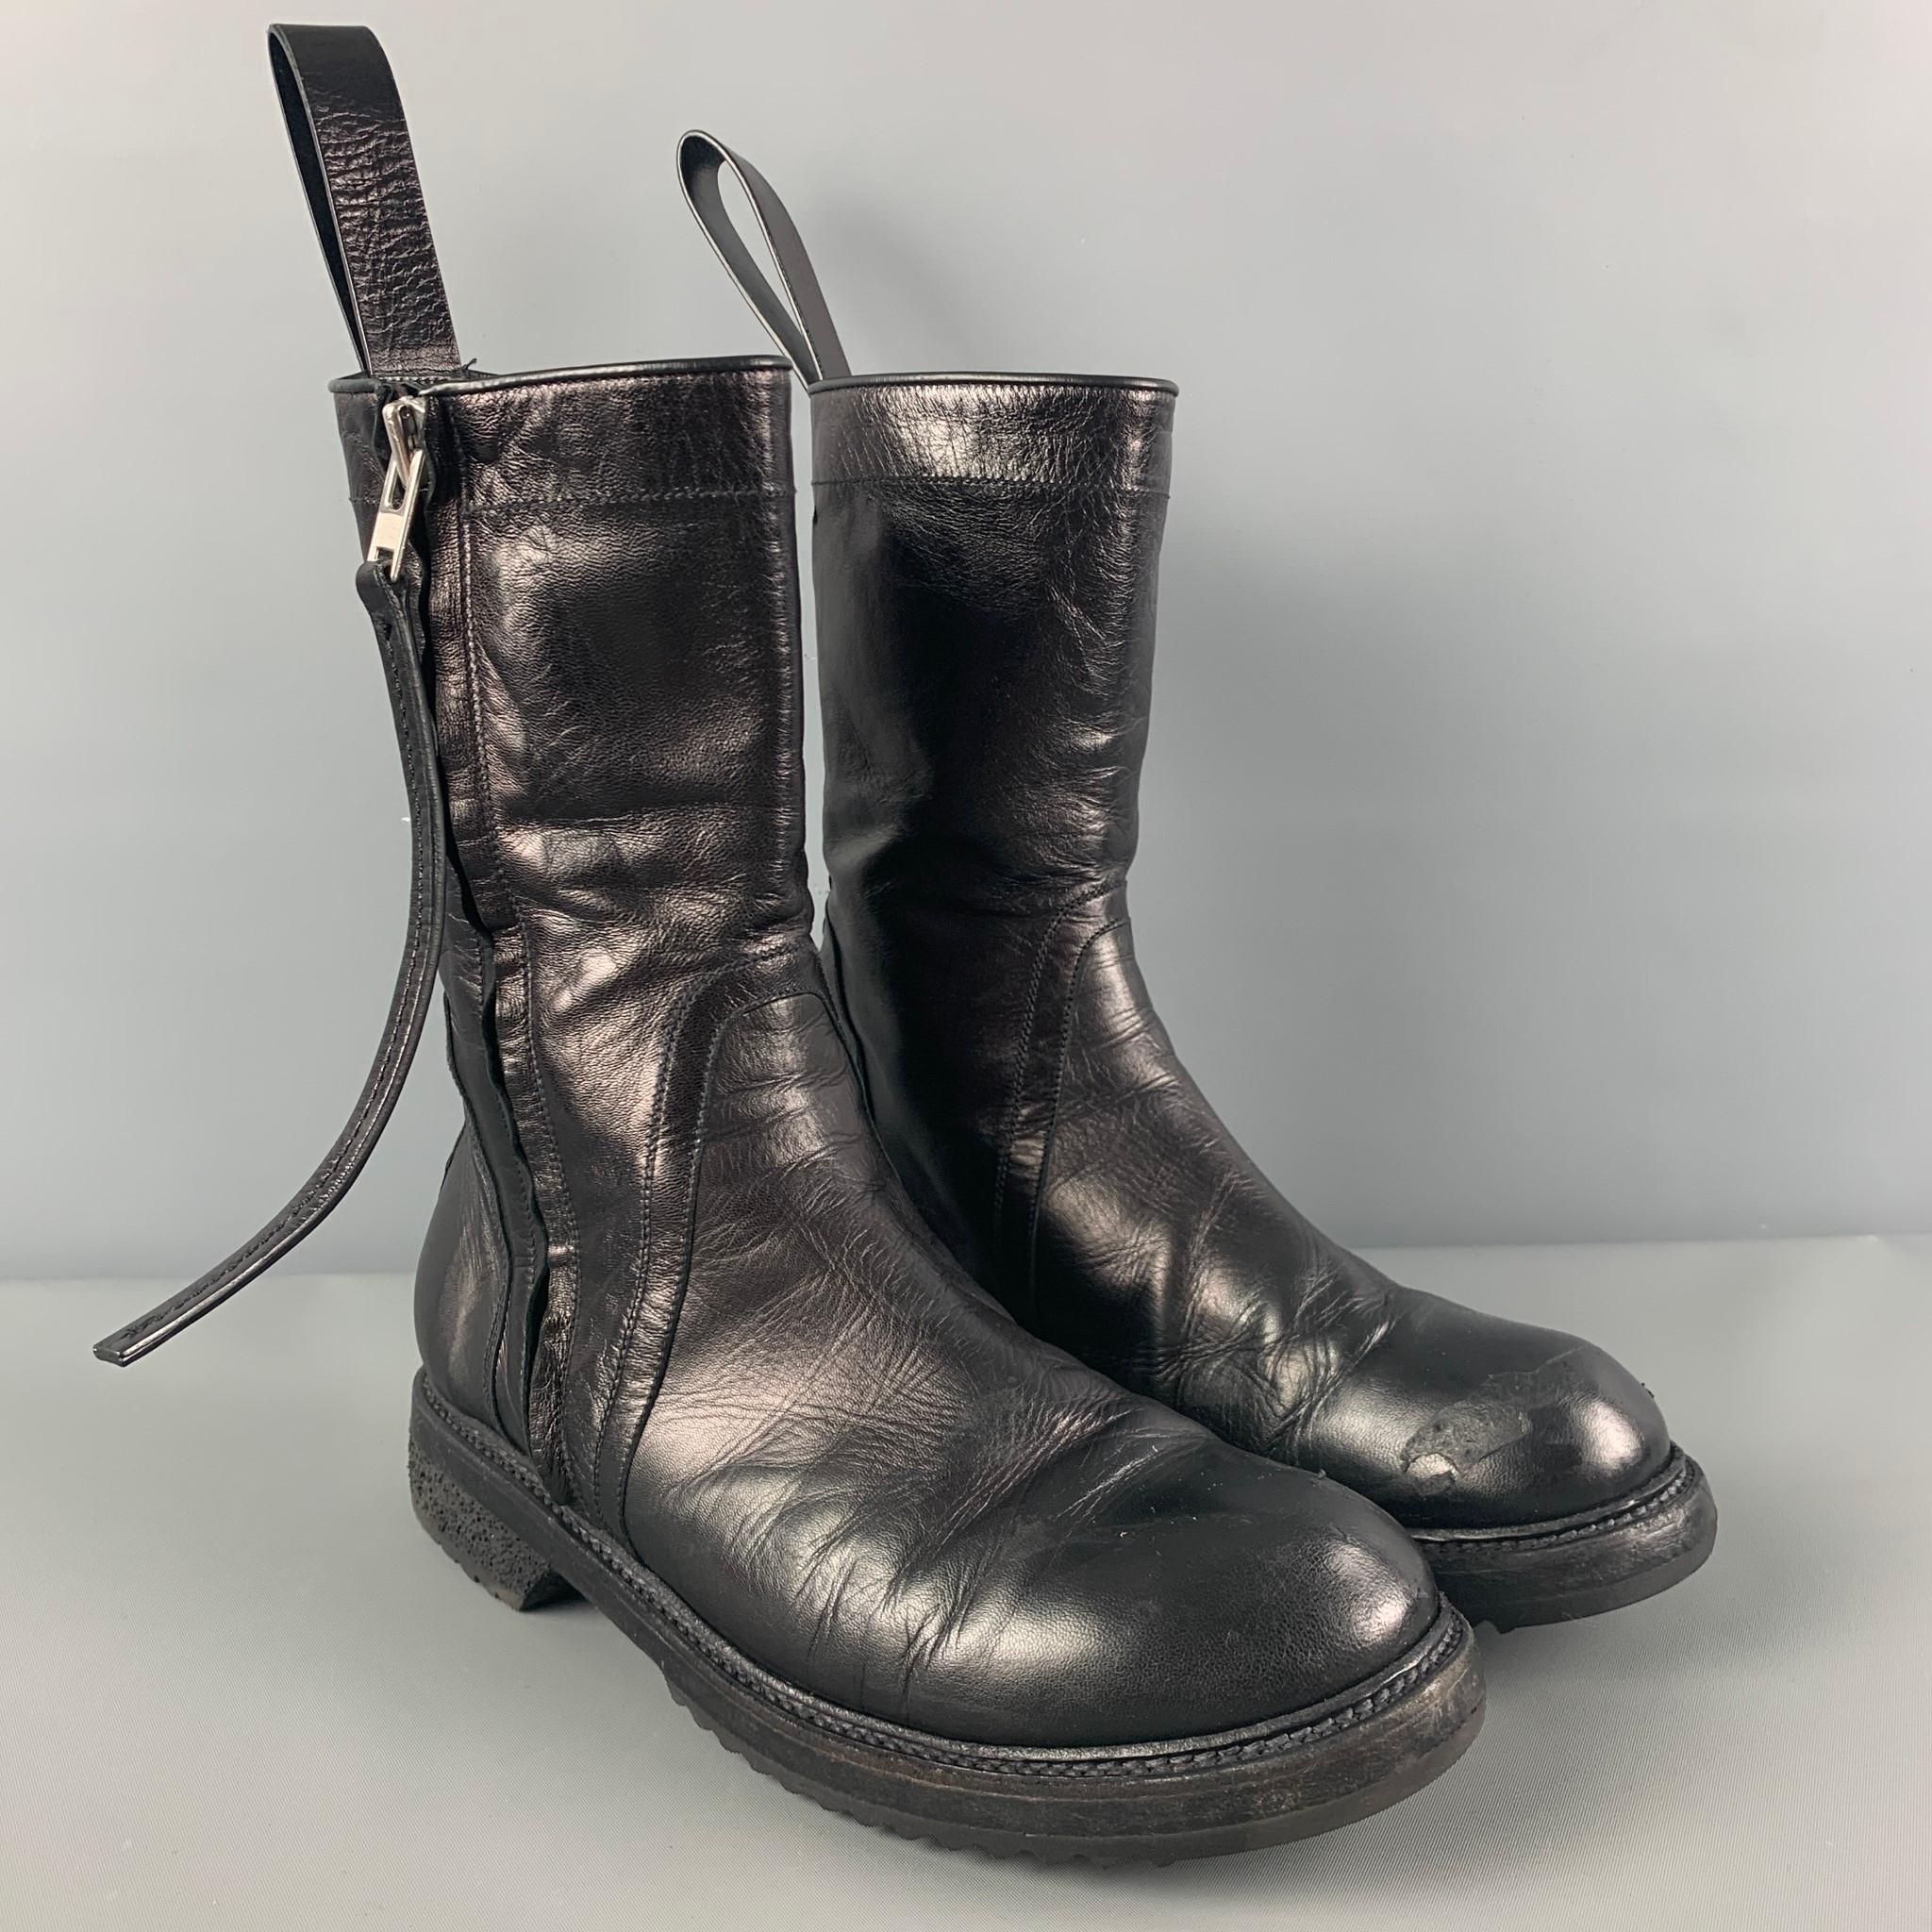 RICK OWENS boots comes in a black leather featuring a round toe, good flex sole, and a side zipper closure. Made in Italy.

Good Pre-Owned Condition. Moderate wear. As-is.
Marked: 38
Original Retail Price: $1,295.00

Measurements:

Length: 11